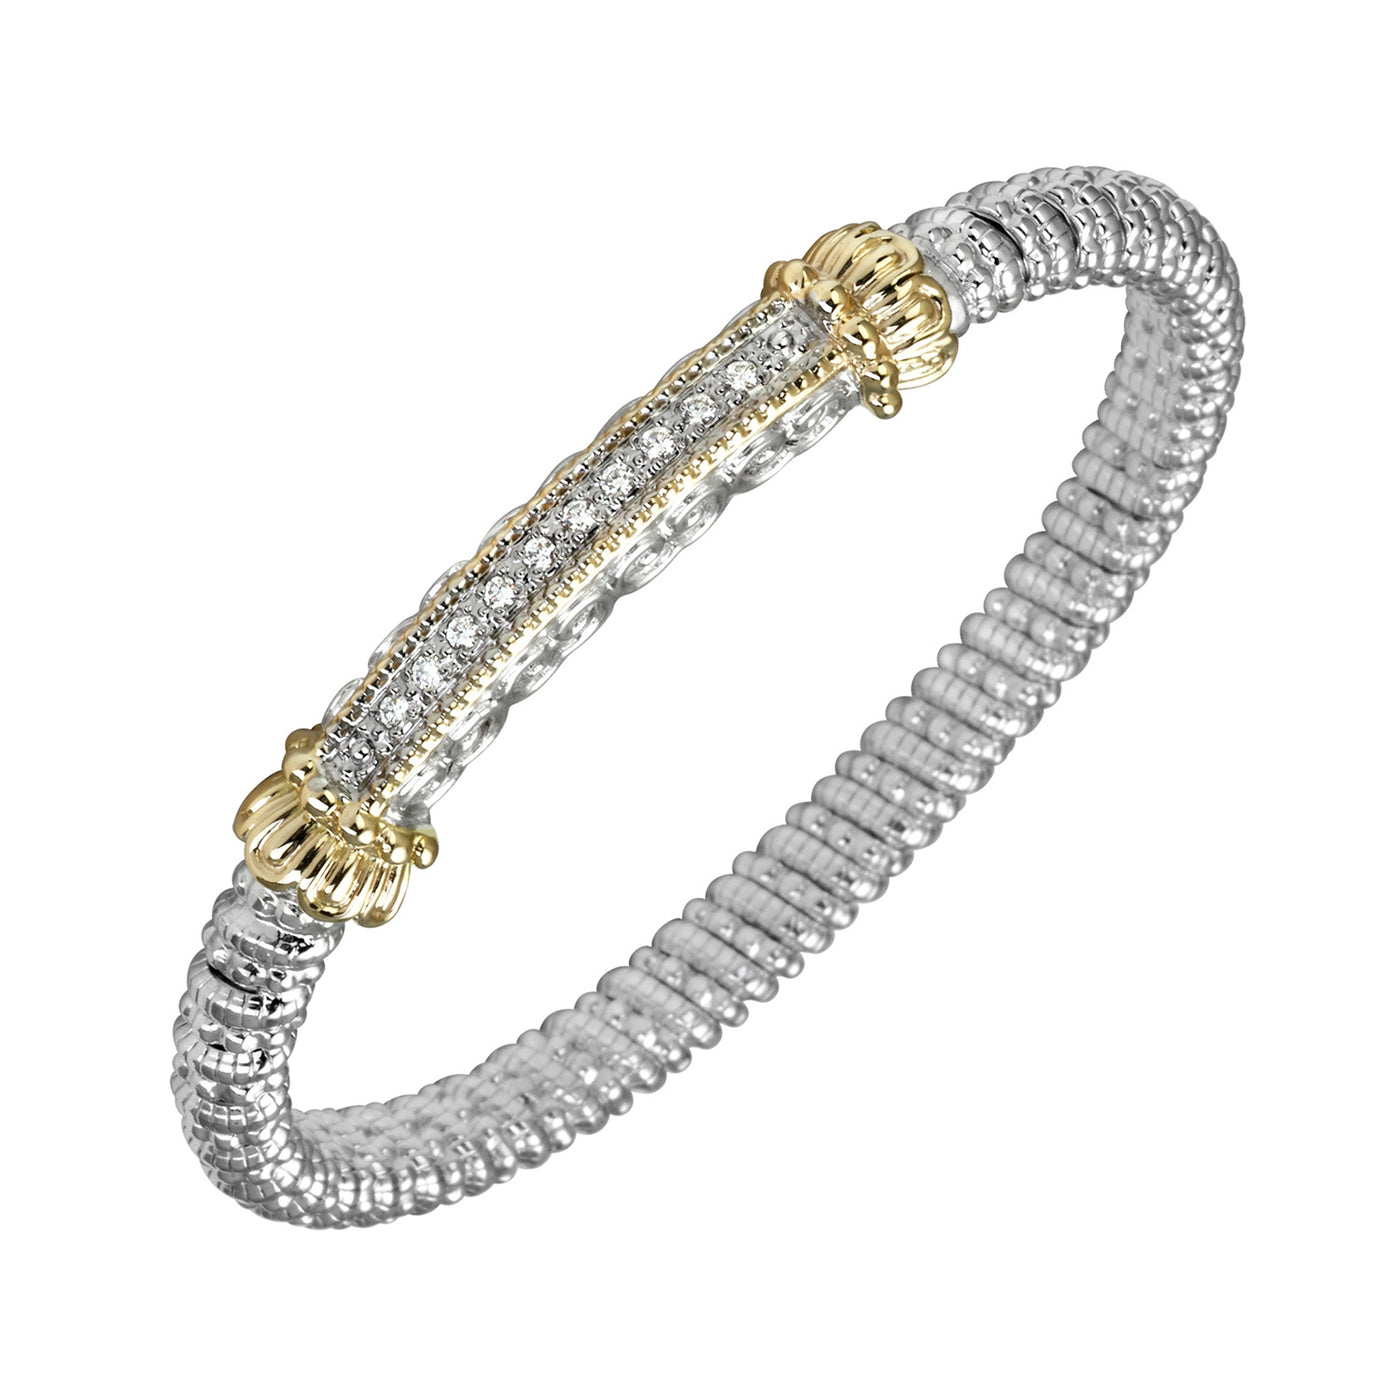 Vahan Sterling Silver and 14k Yellow Gold Moiré Beaded® Bangle Bracelet with Diamonds – 21734D